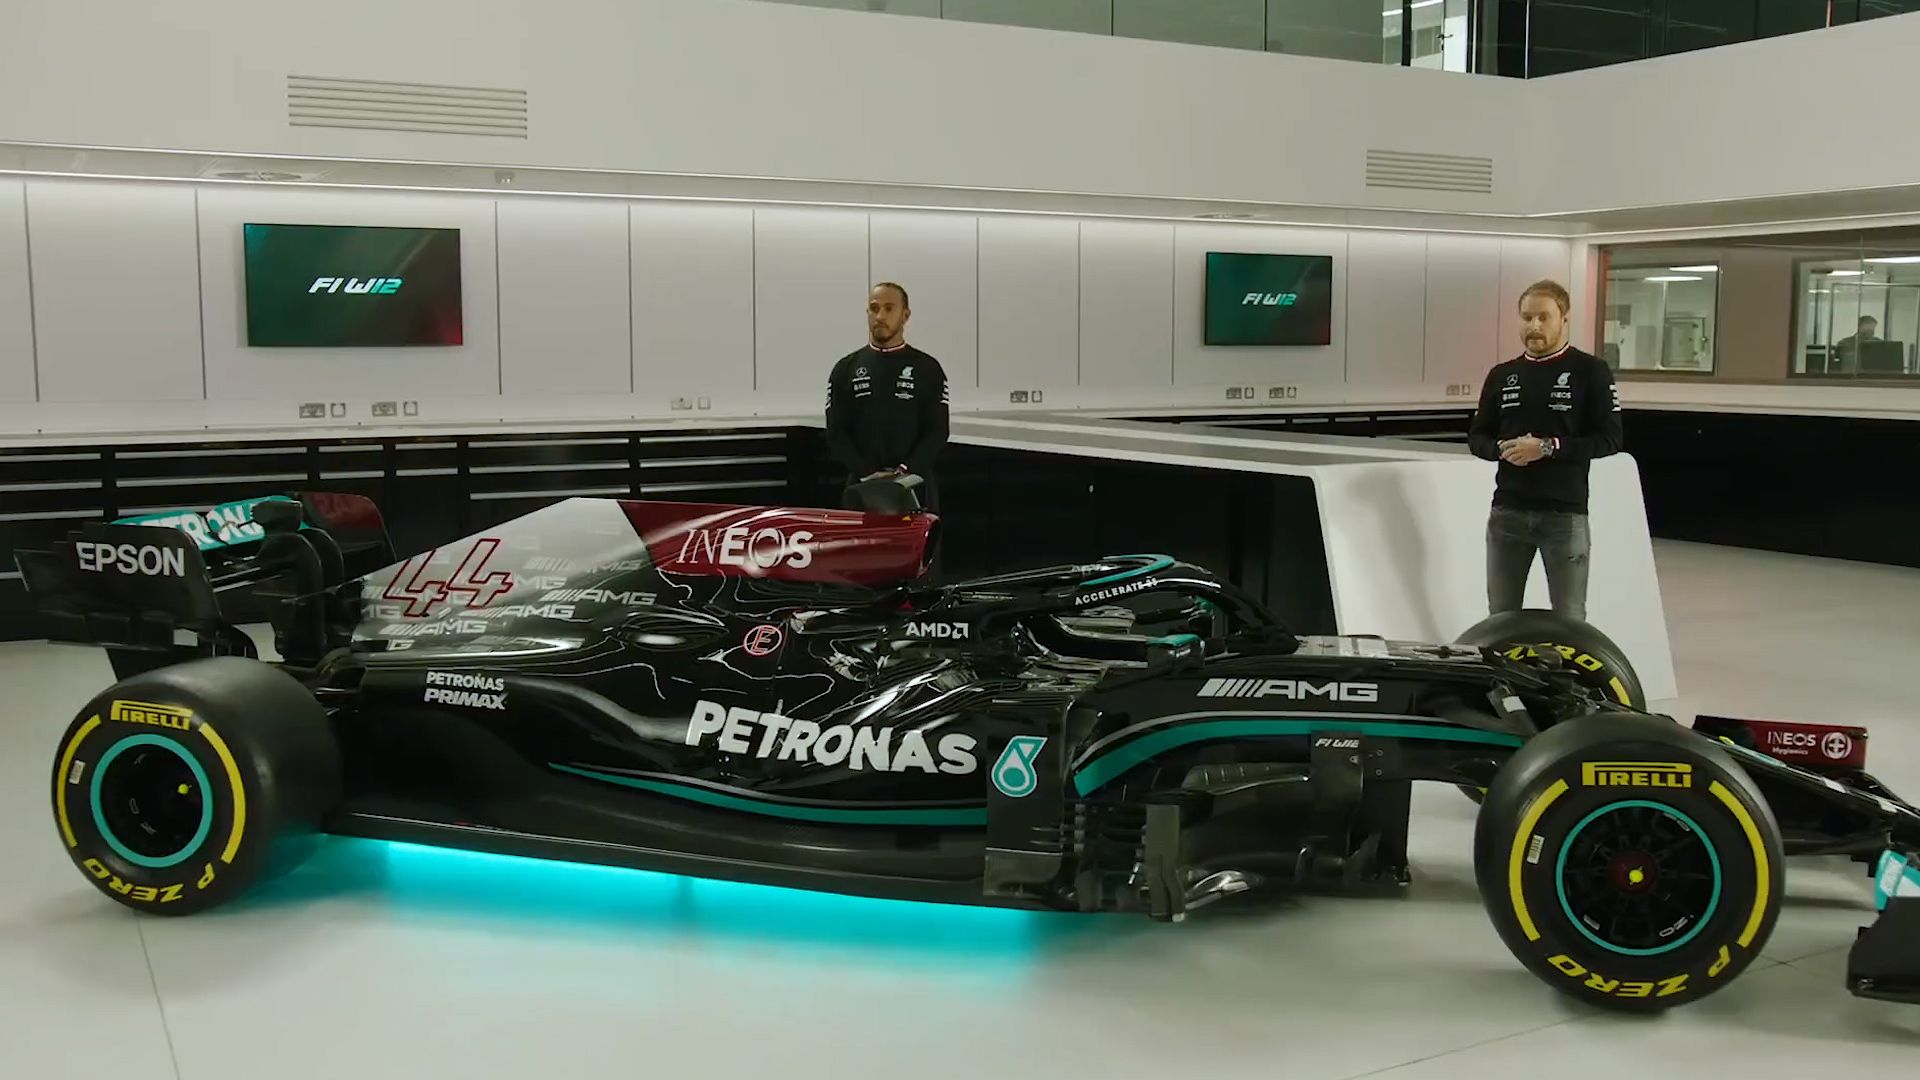 WATCH: The best bits from the Mercedes 2021 car launch as Hamilton and Bottas reveal the W12. Formula 1®